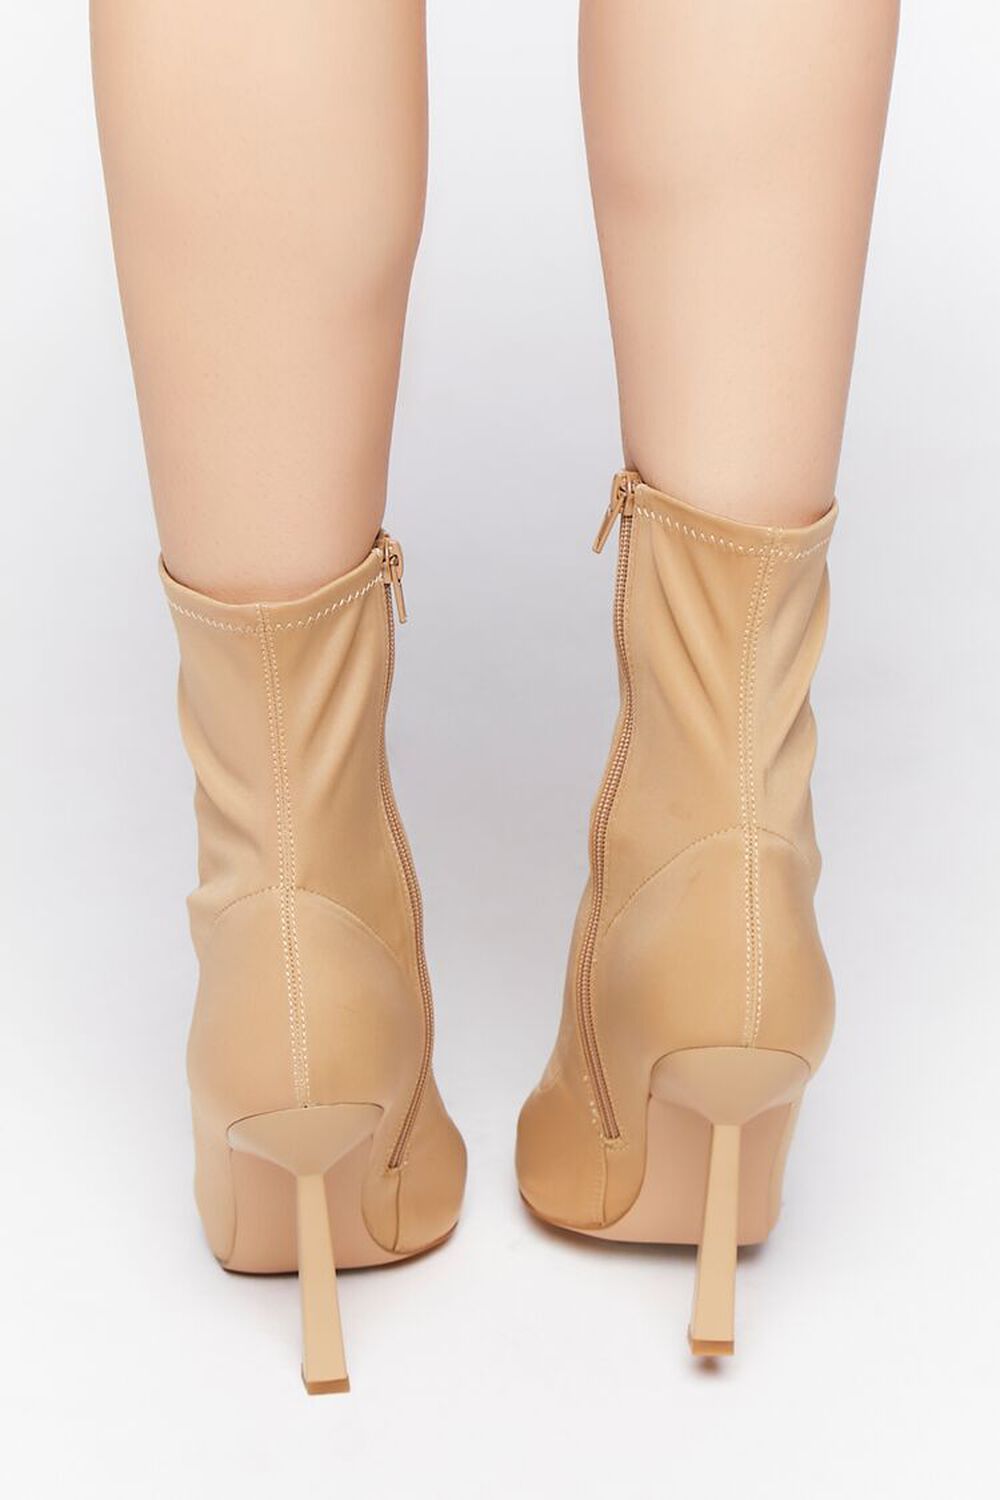 NUDE Pointed-Toe Stiletto Sock Booties, image 3